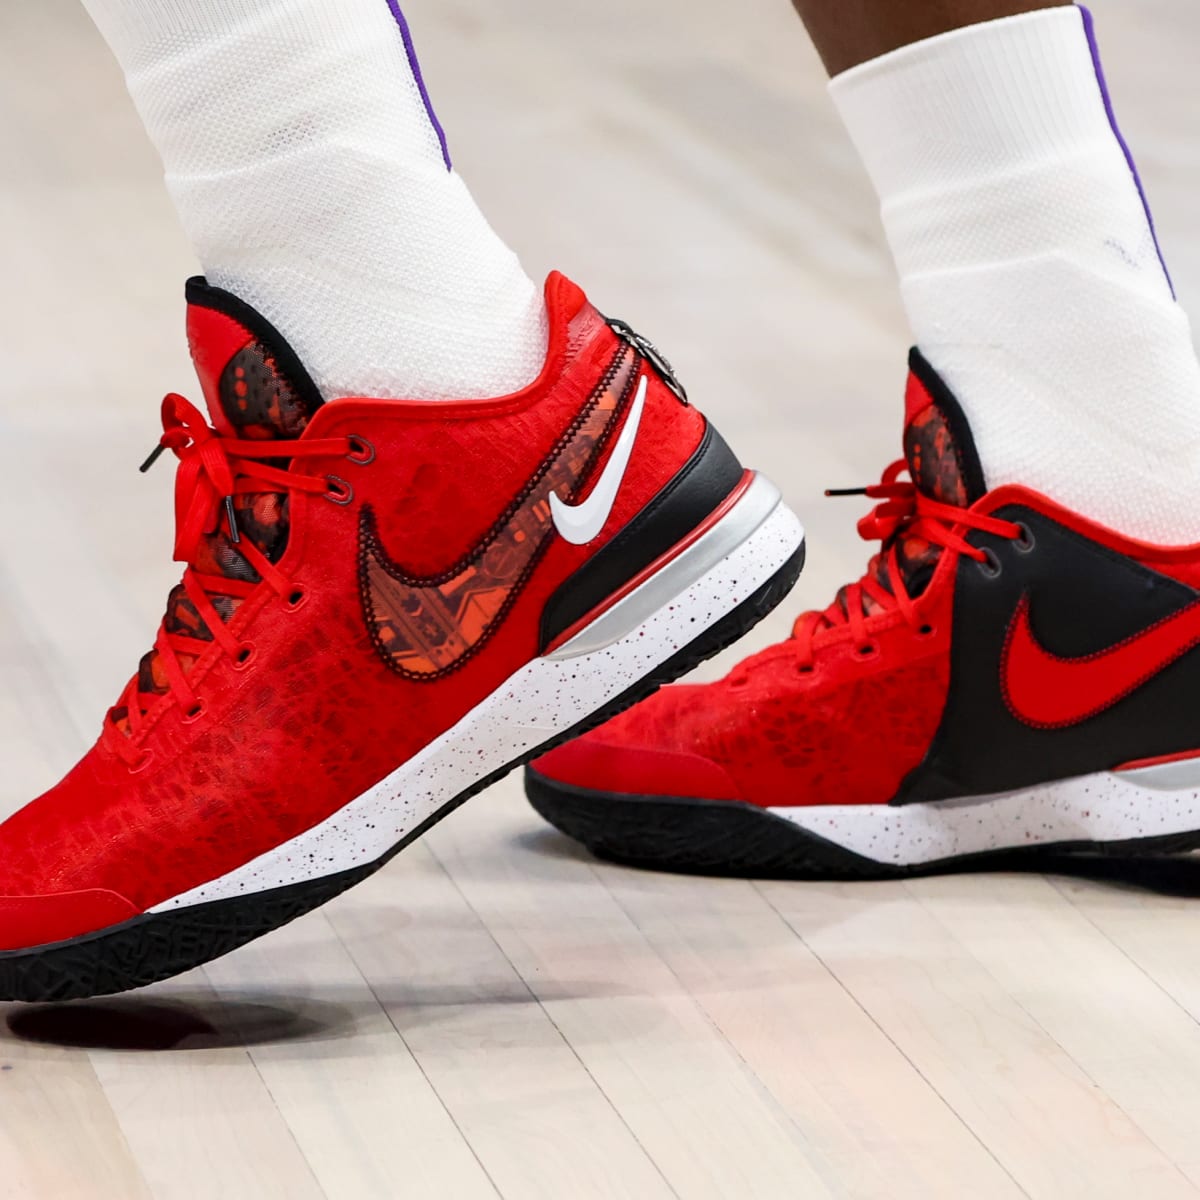 LeBron James Wears Unreleased Nike NXXT Gen Shoes - Illustrated Kicks News, Analysis and More